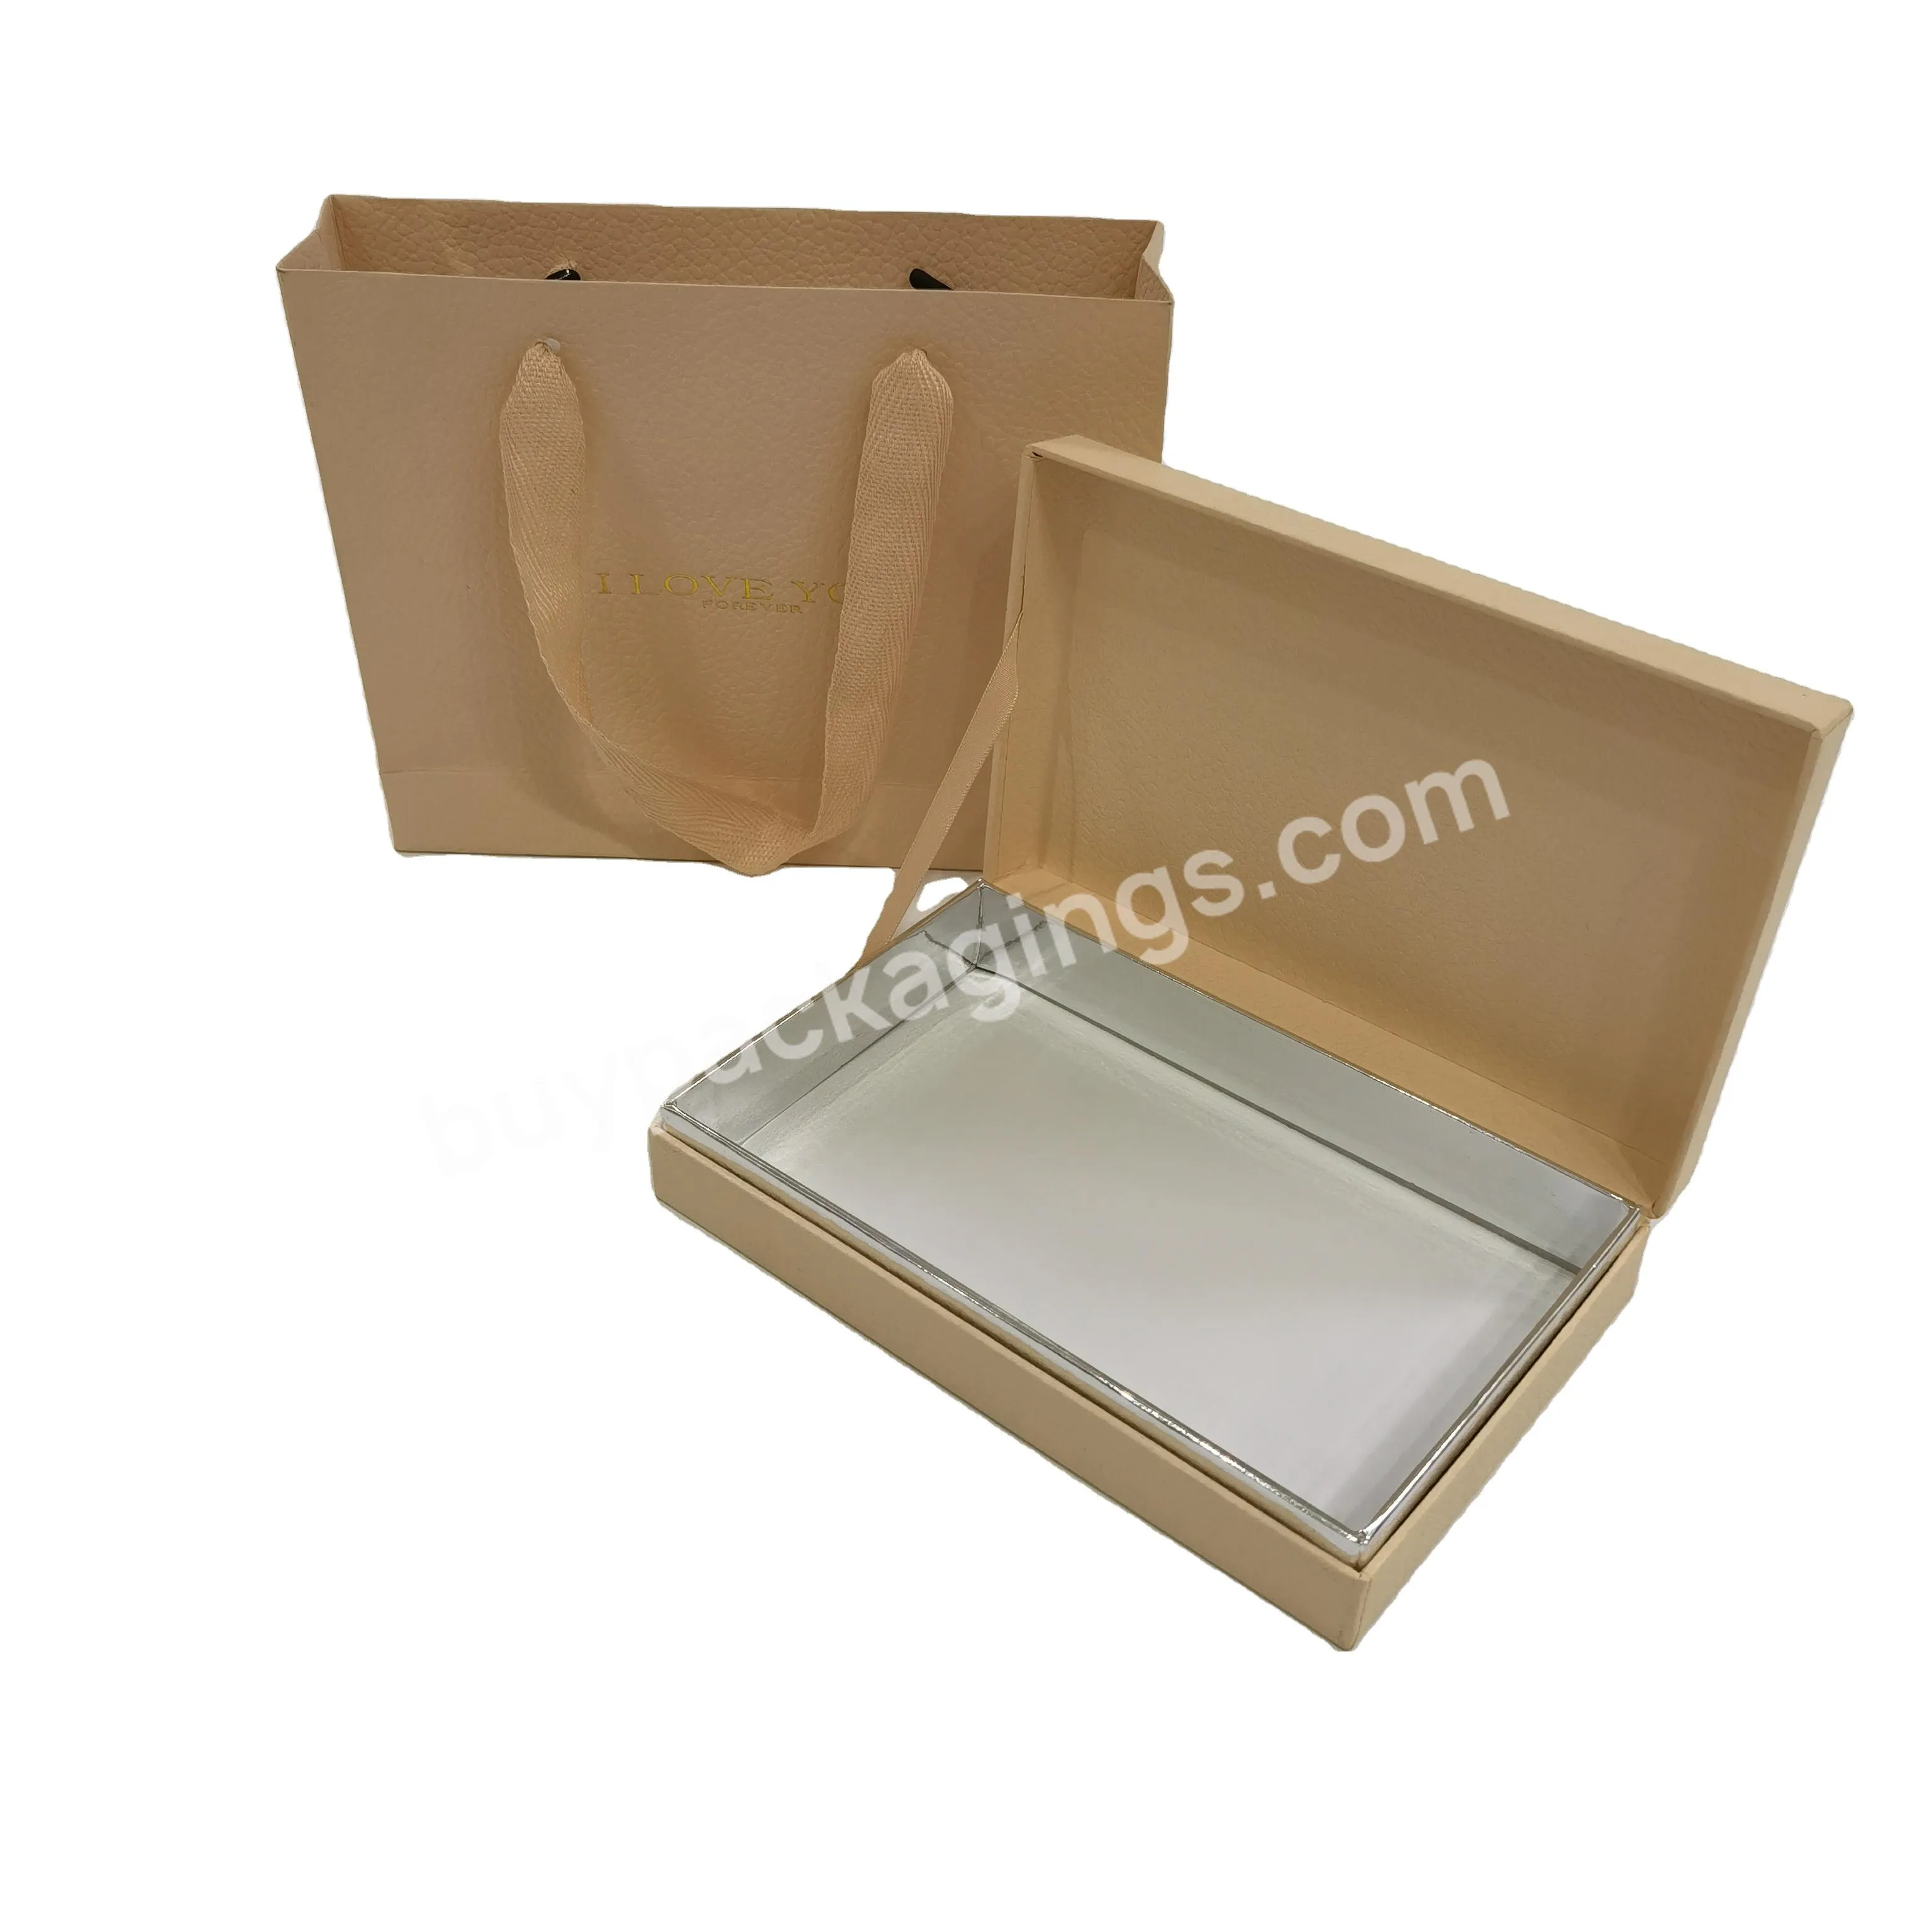 Luxury Cosmetic Packaging Matt Laminated Coated Art Paper Bag And Box Gift Sets For Refine Wine